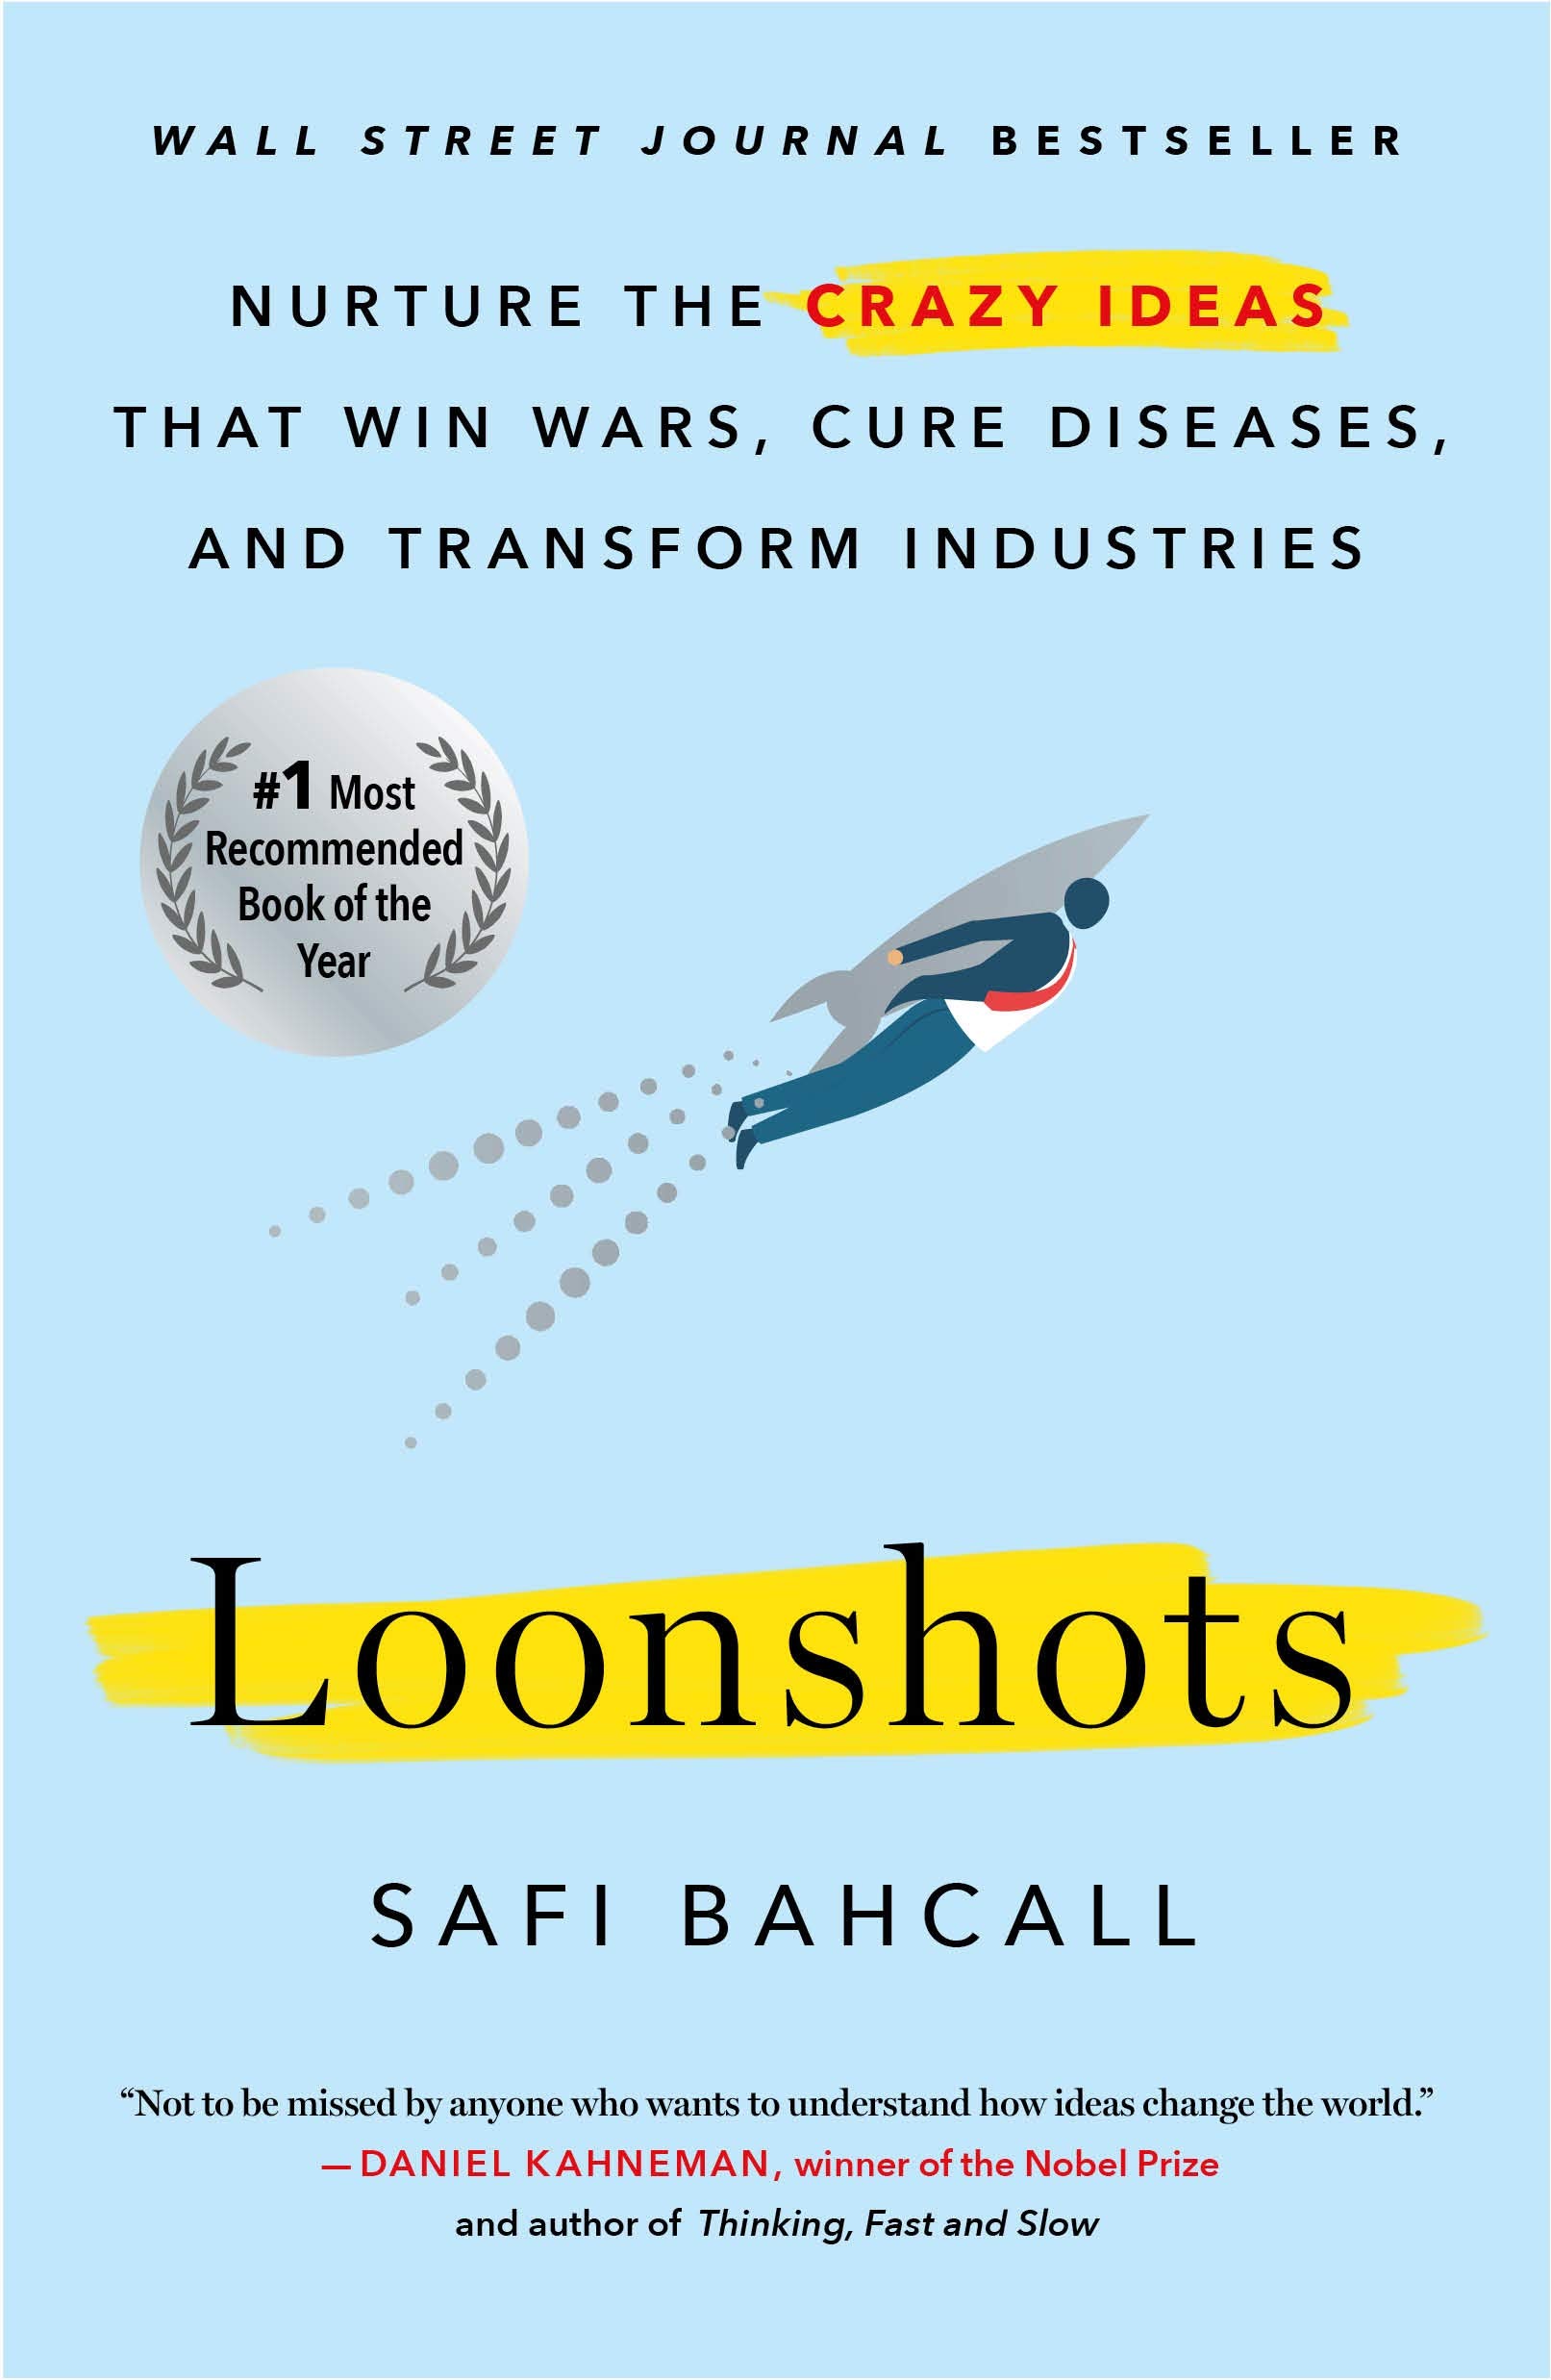 Loonshots - Nurture the crazy ideas by Safi Bahcall